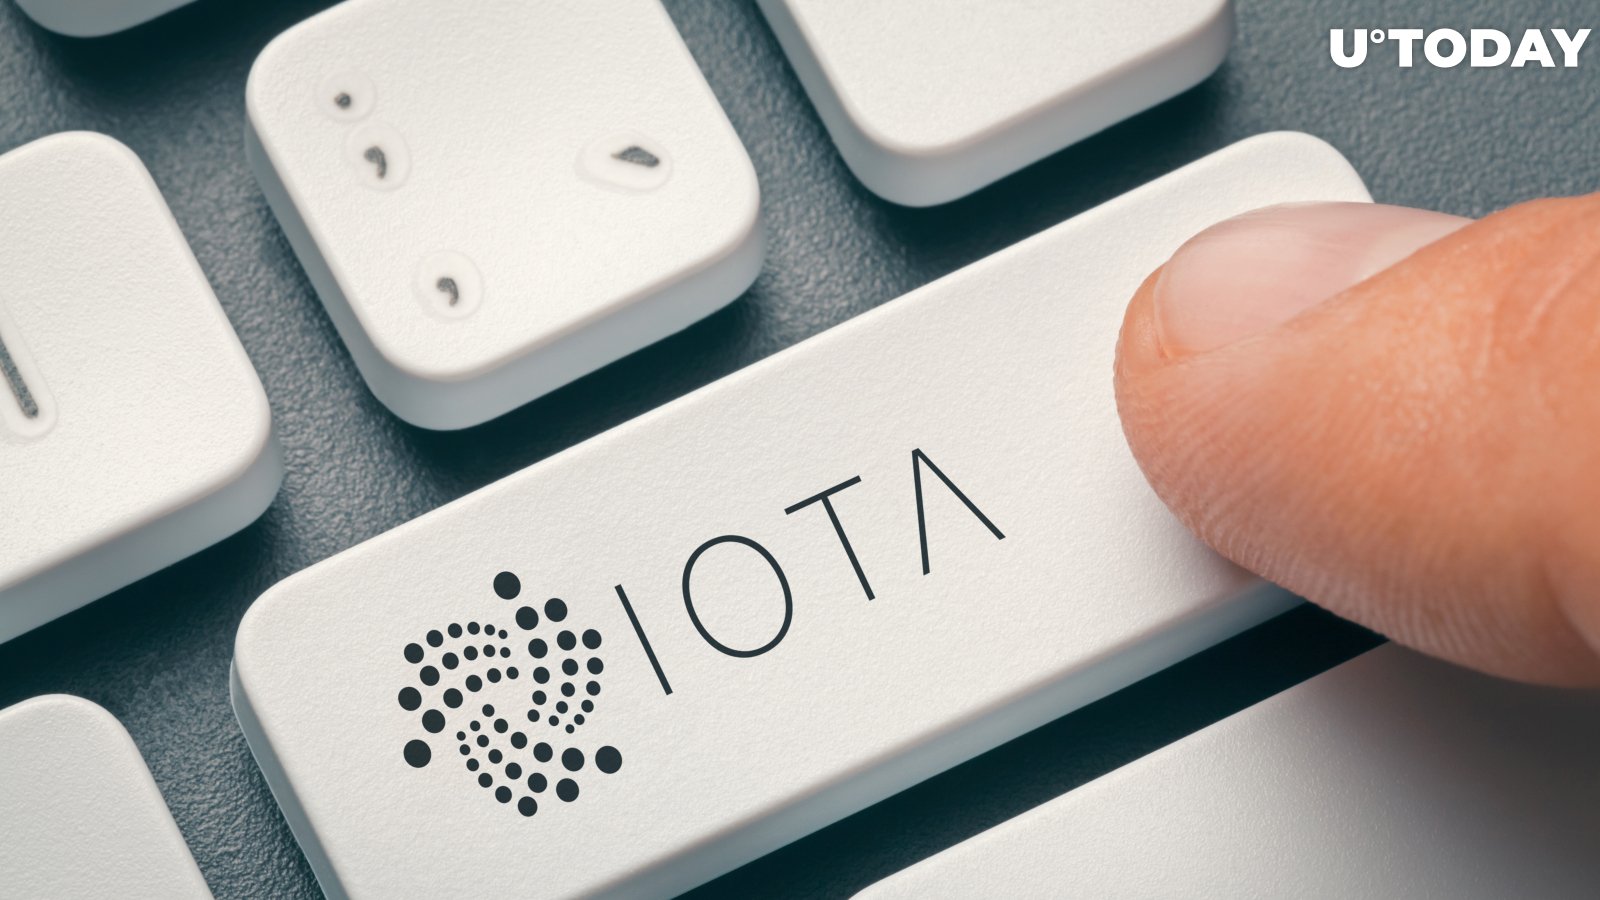 IOTA Releases New Version of Its Trinity Wallet with These Important Fixes